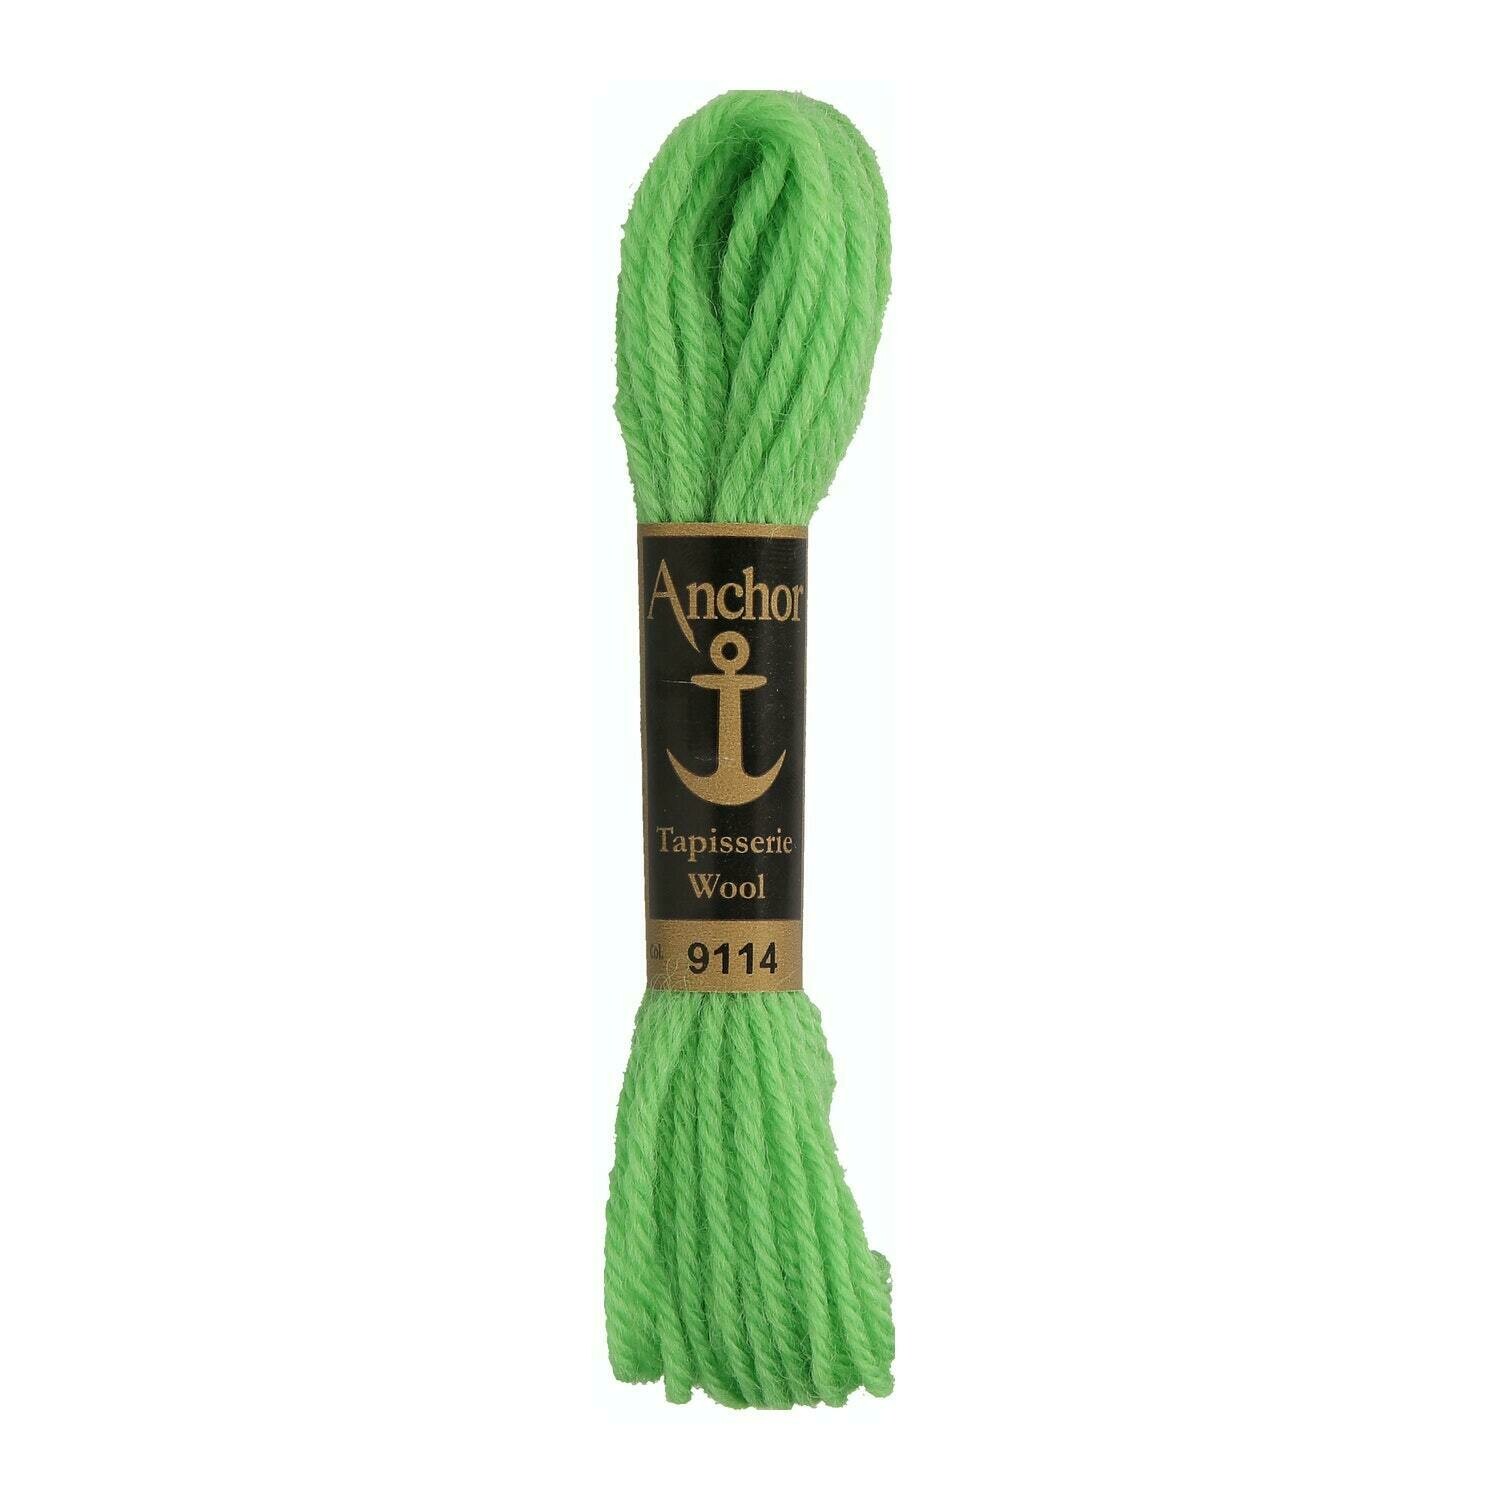 Anchor Tapisserie Wool #09114